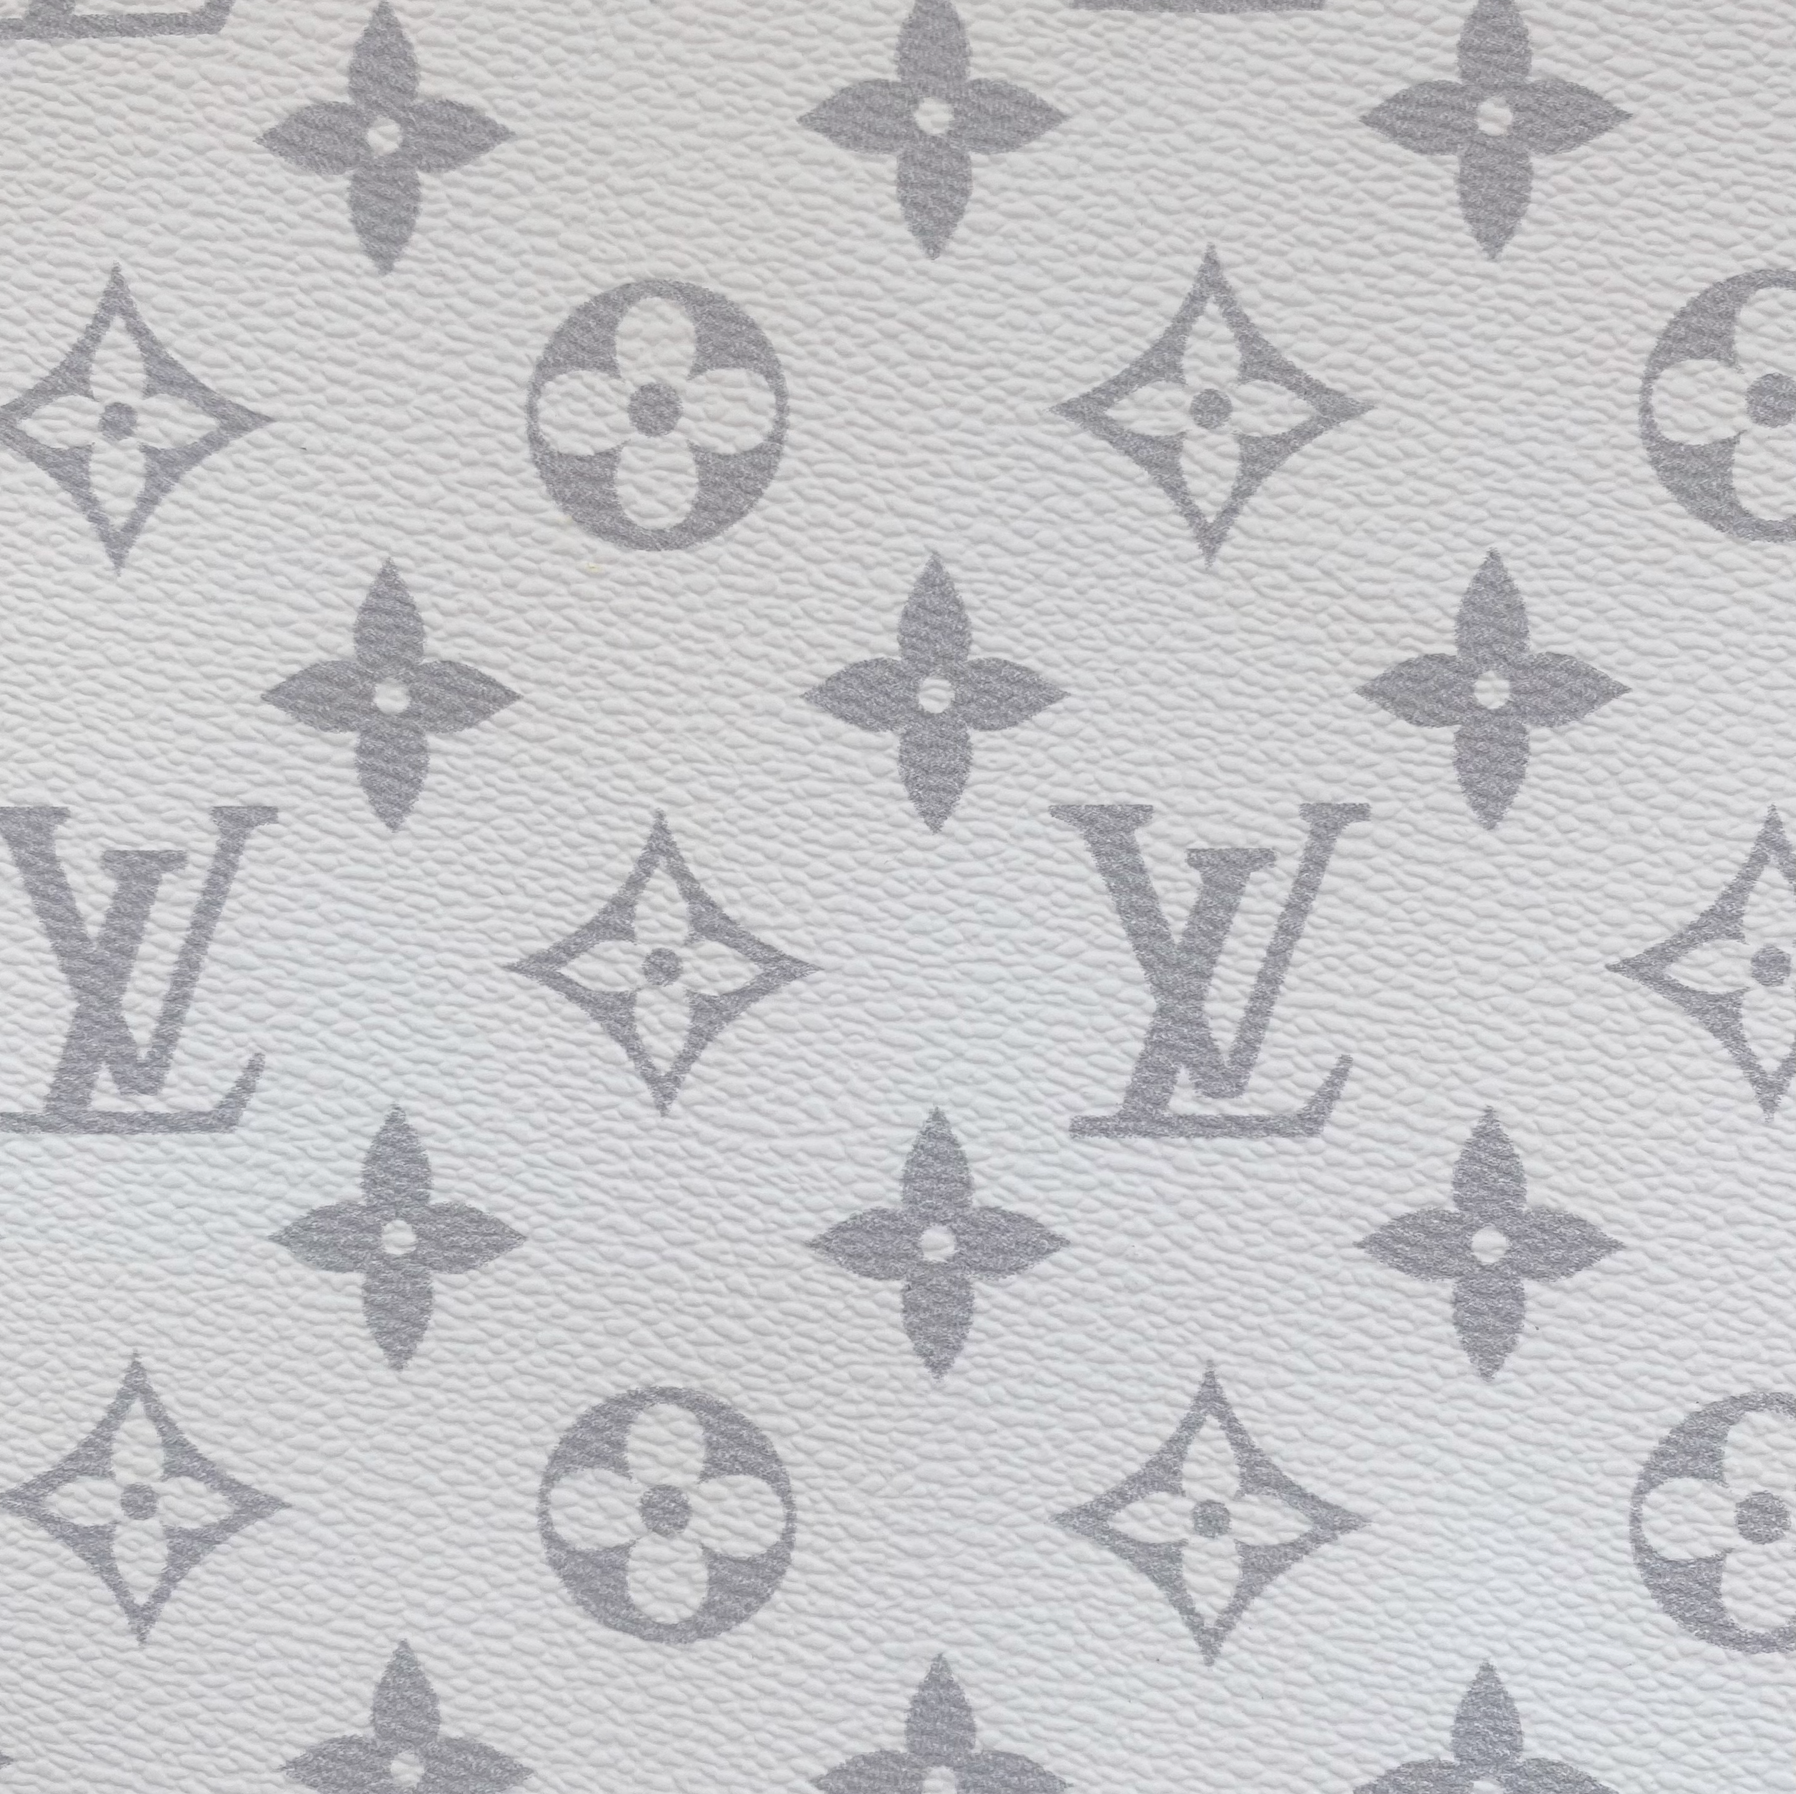 lv material by the yard